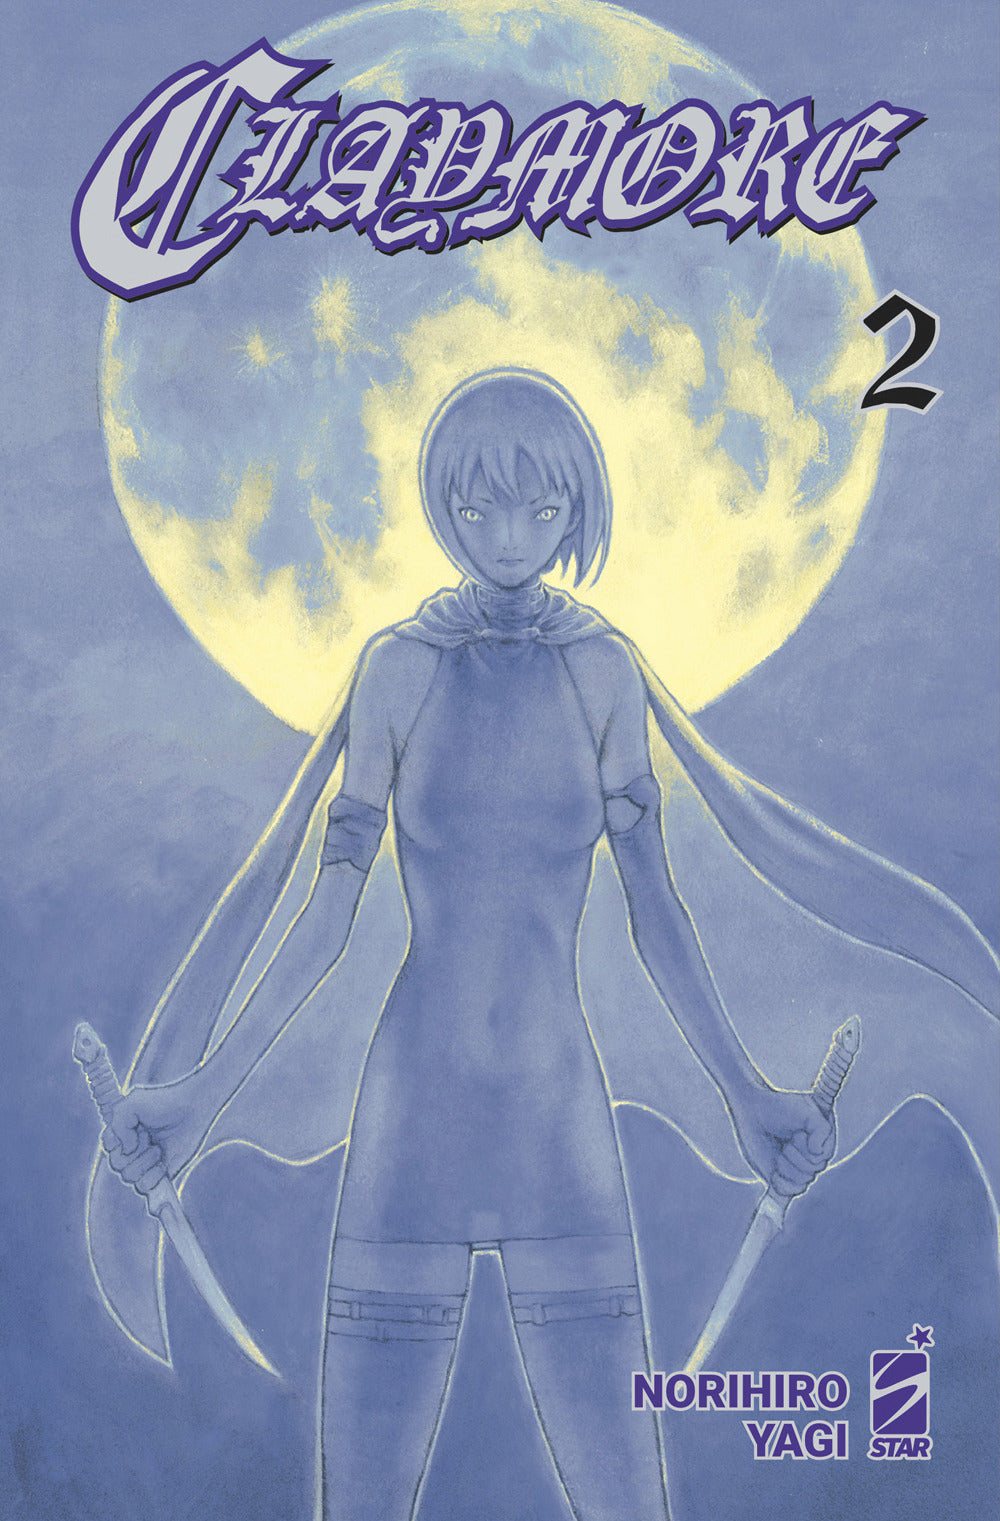 Claymore. New edition. Vol. 2.